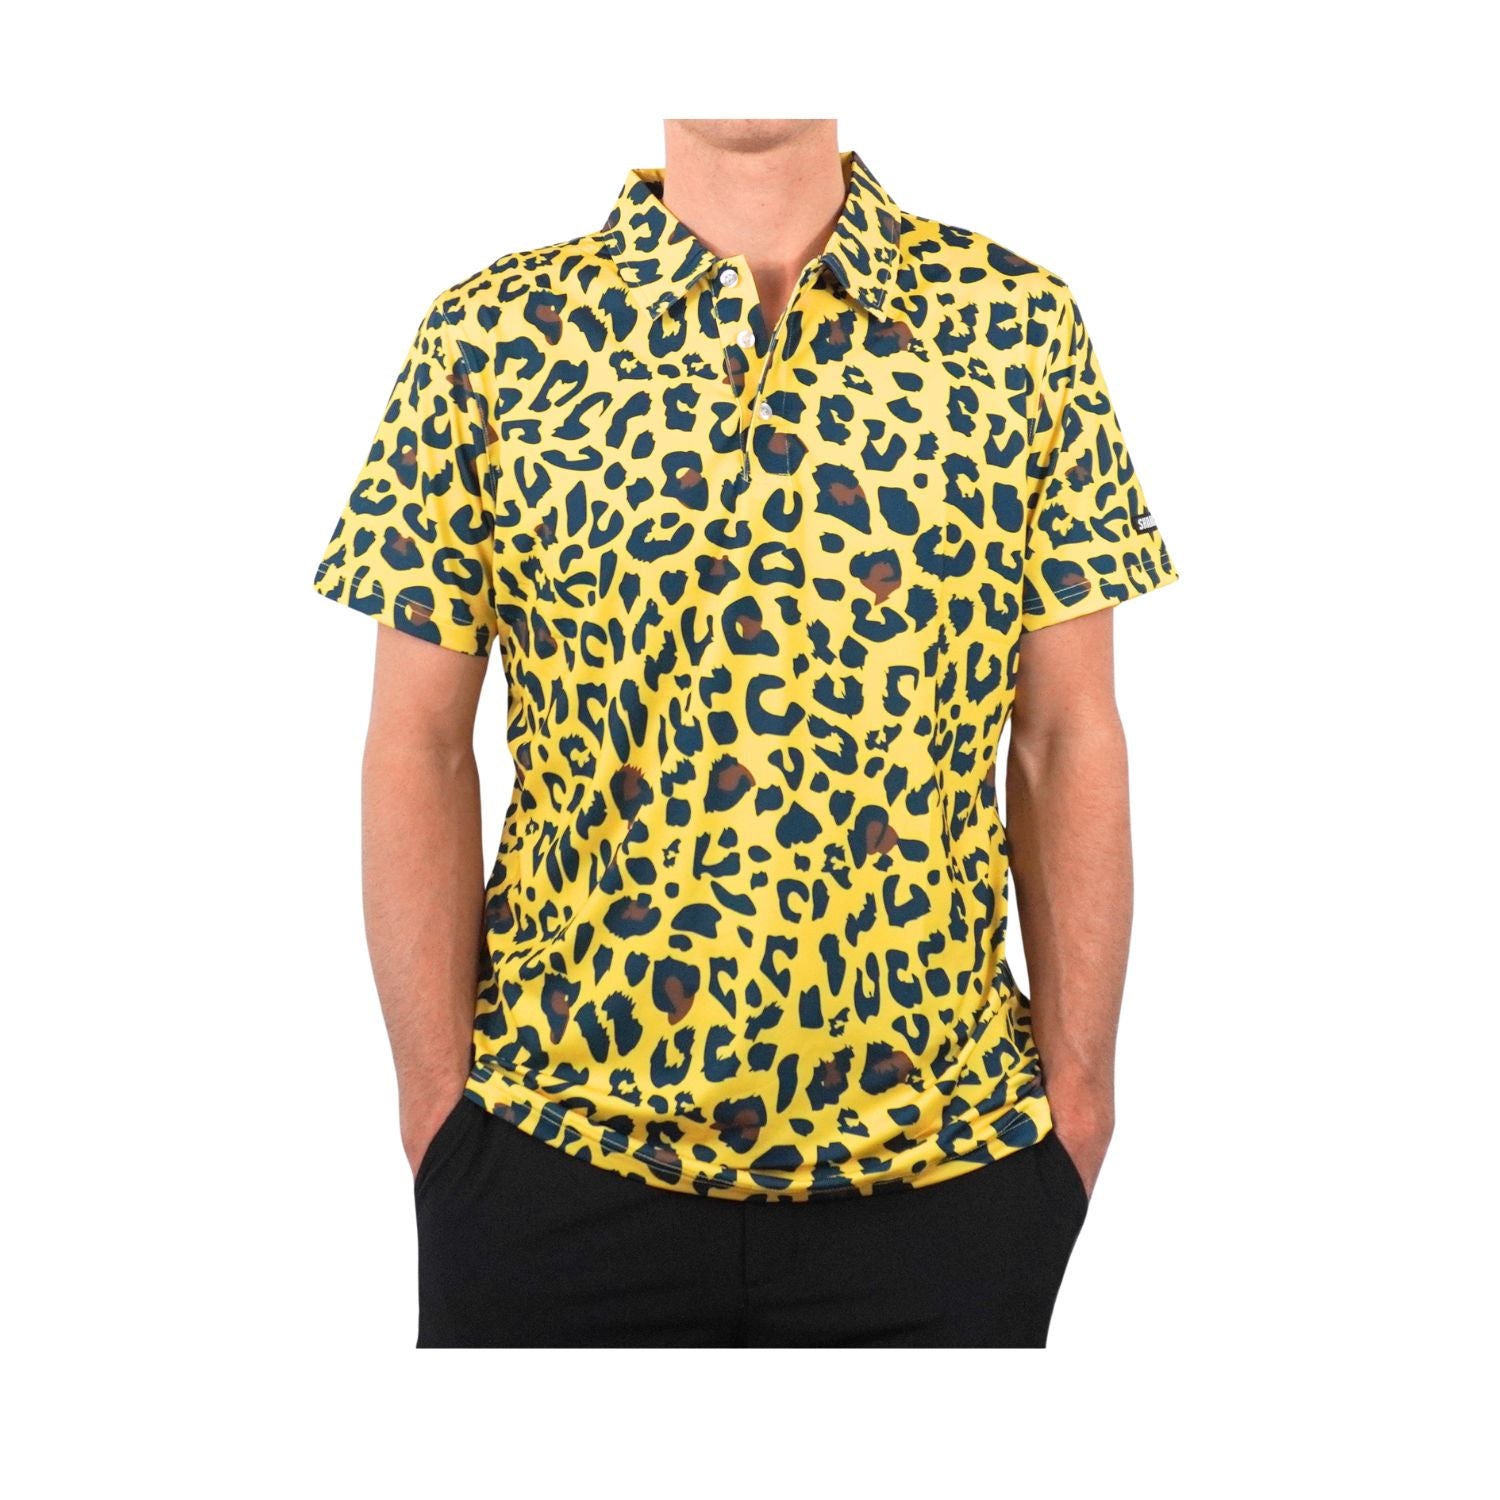 Cheetah Reviews - Singapore General Clothing & Others